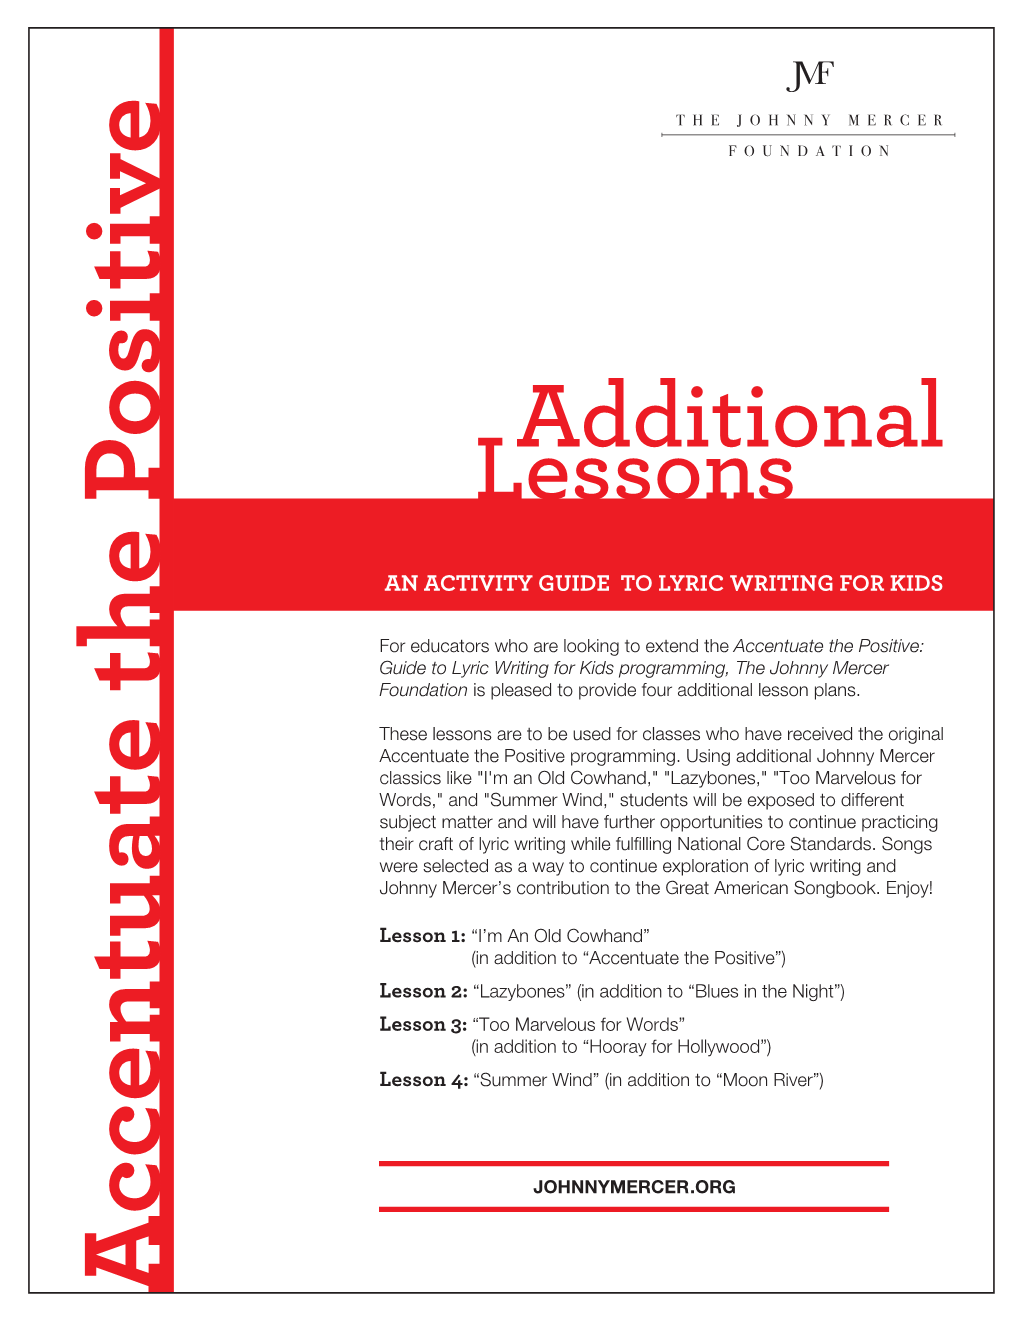 NEW** Download Additional Lessons